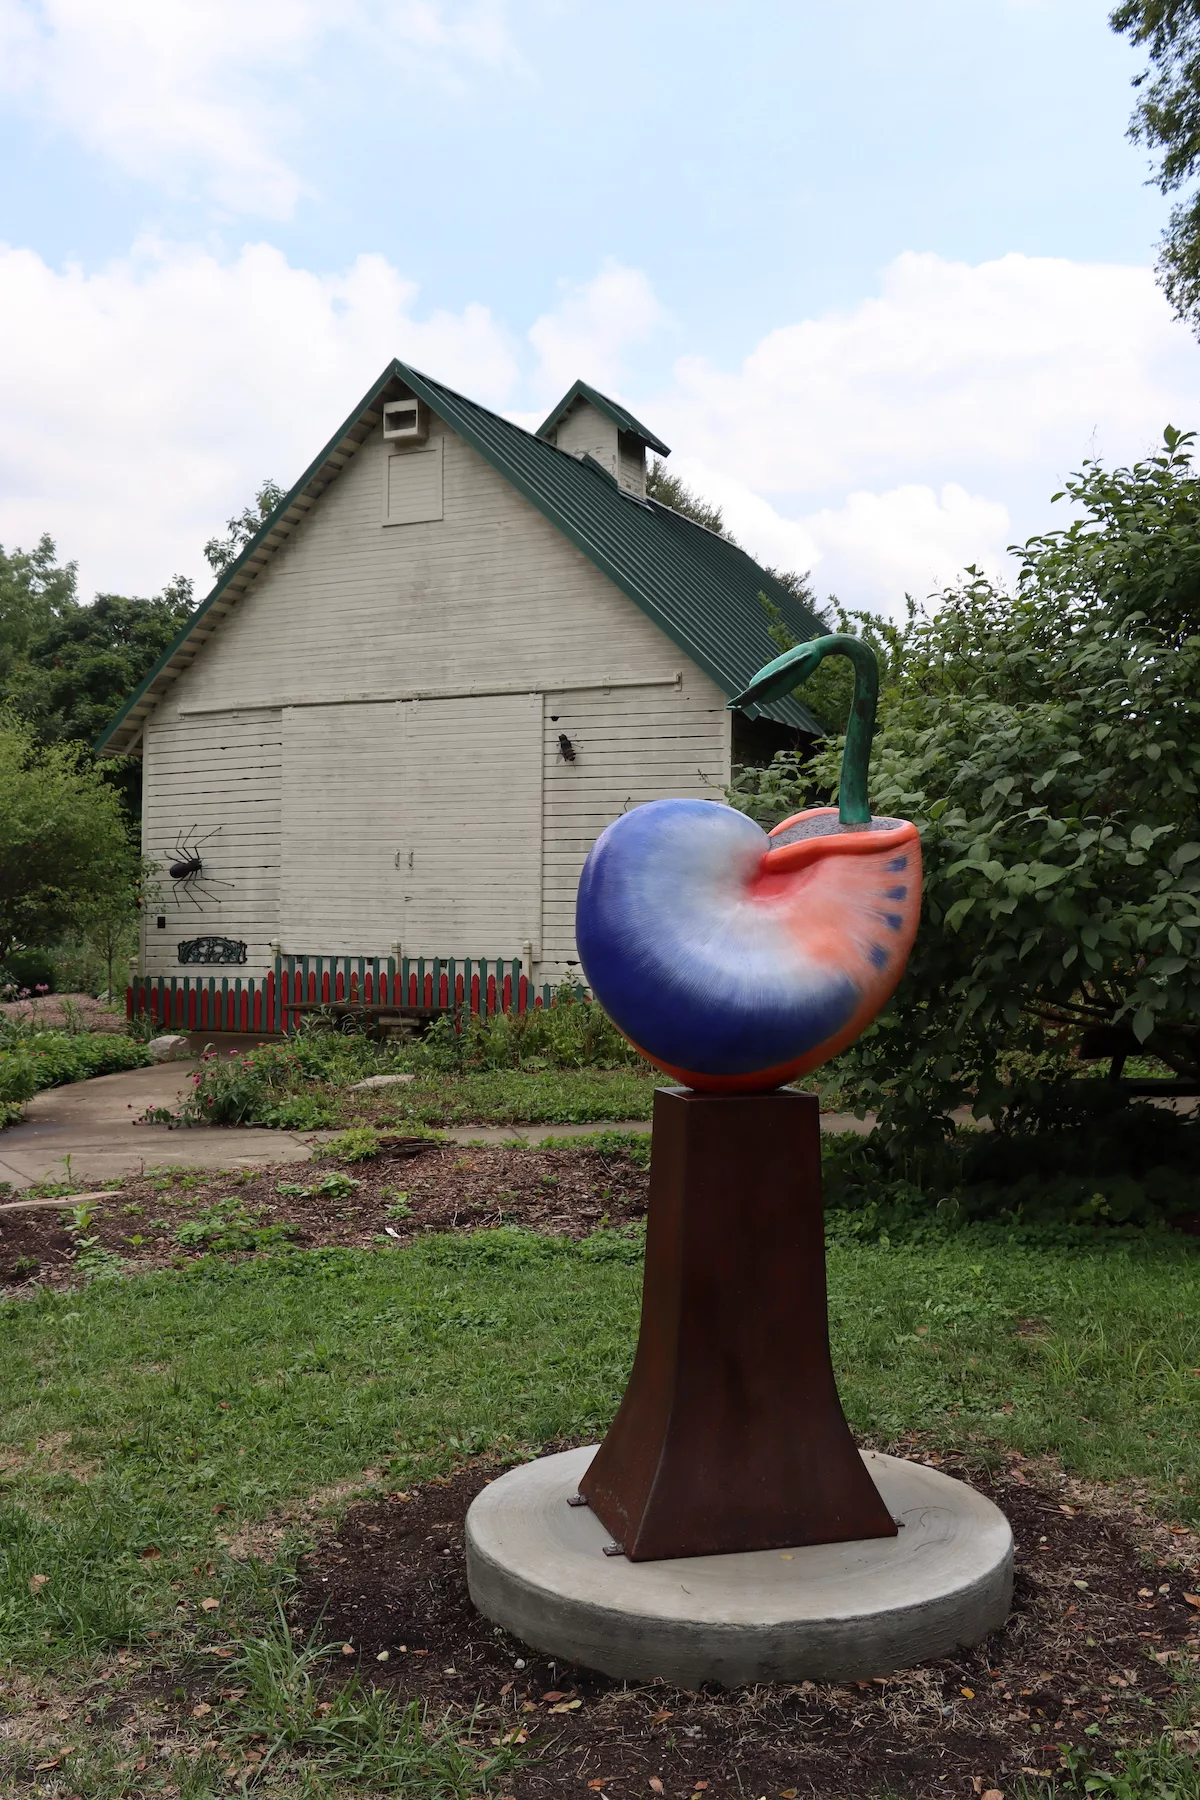 Sculpture in front of barn at Meadowbrook Park in Urbana, Illinois